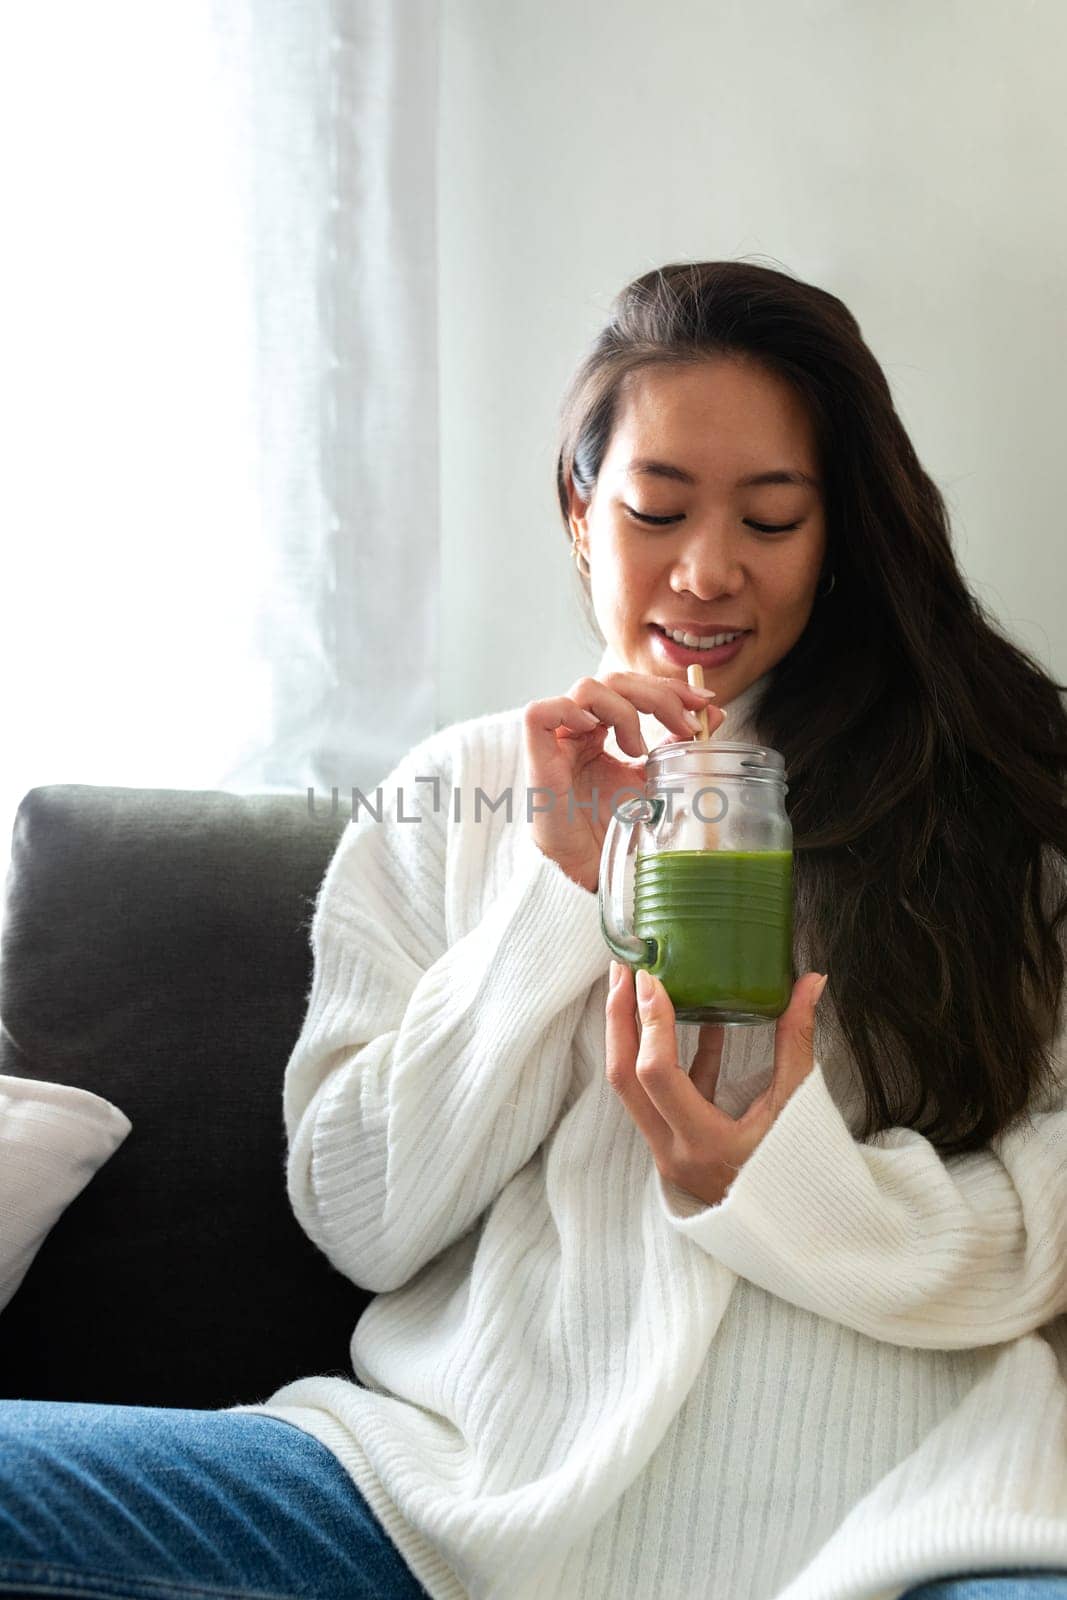 Vertical portrait of young beautiful Asian woman relaxing at home drinking healthy green juice. Female enjoying vegetable smoothie. Healthy eating and lifestyle concepts.